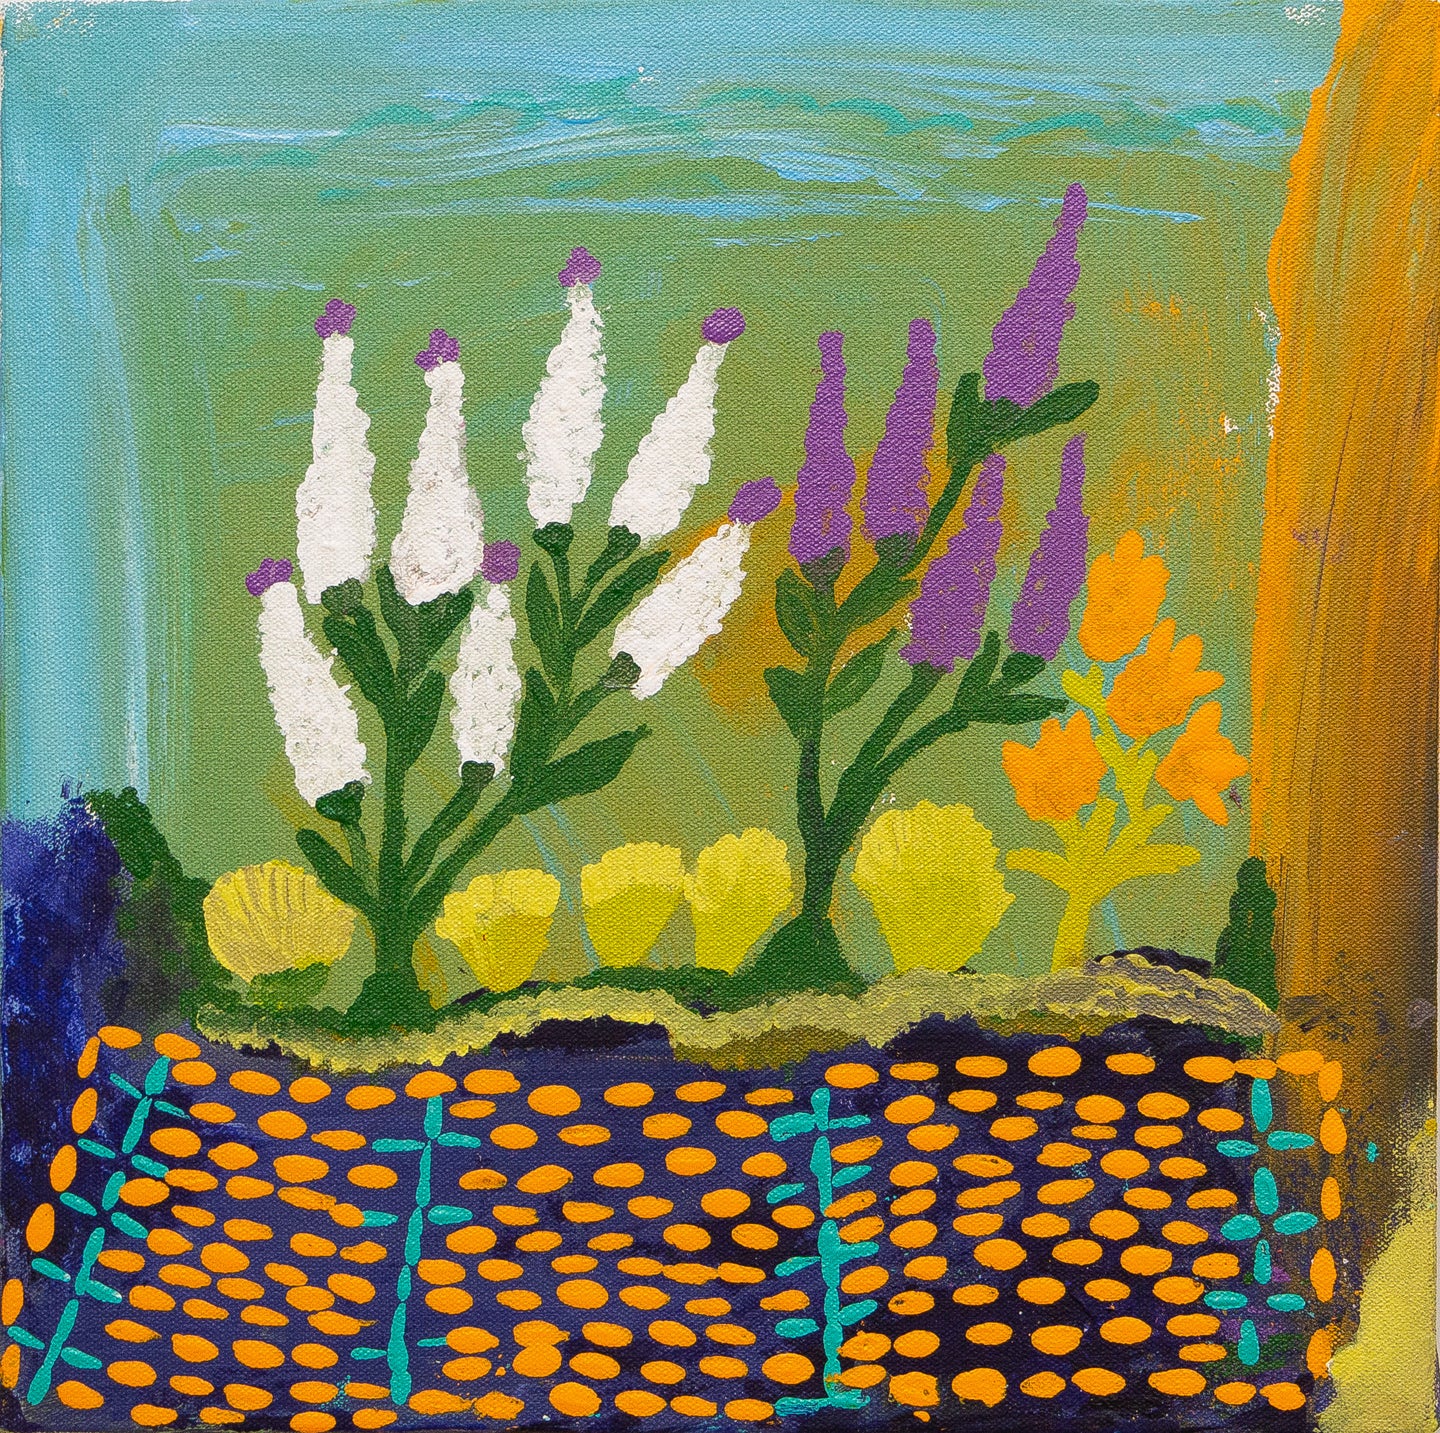 Bush Flowers on Country, 30x30 cm